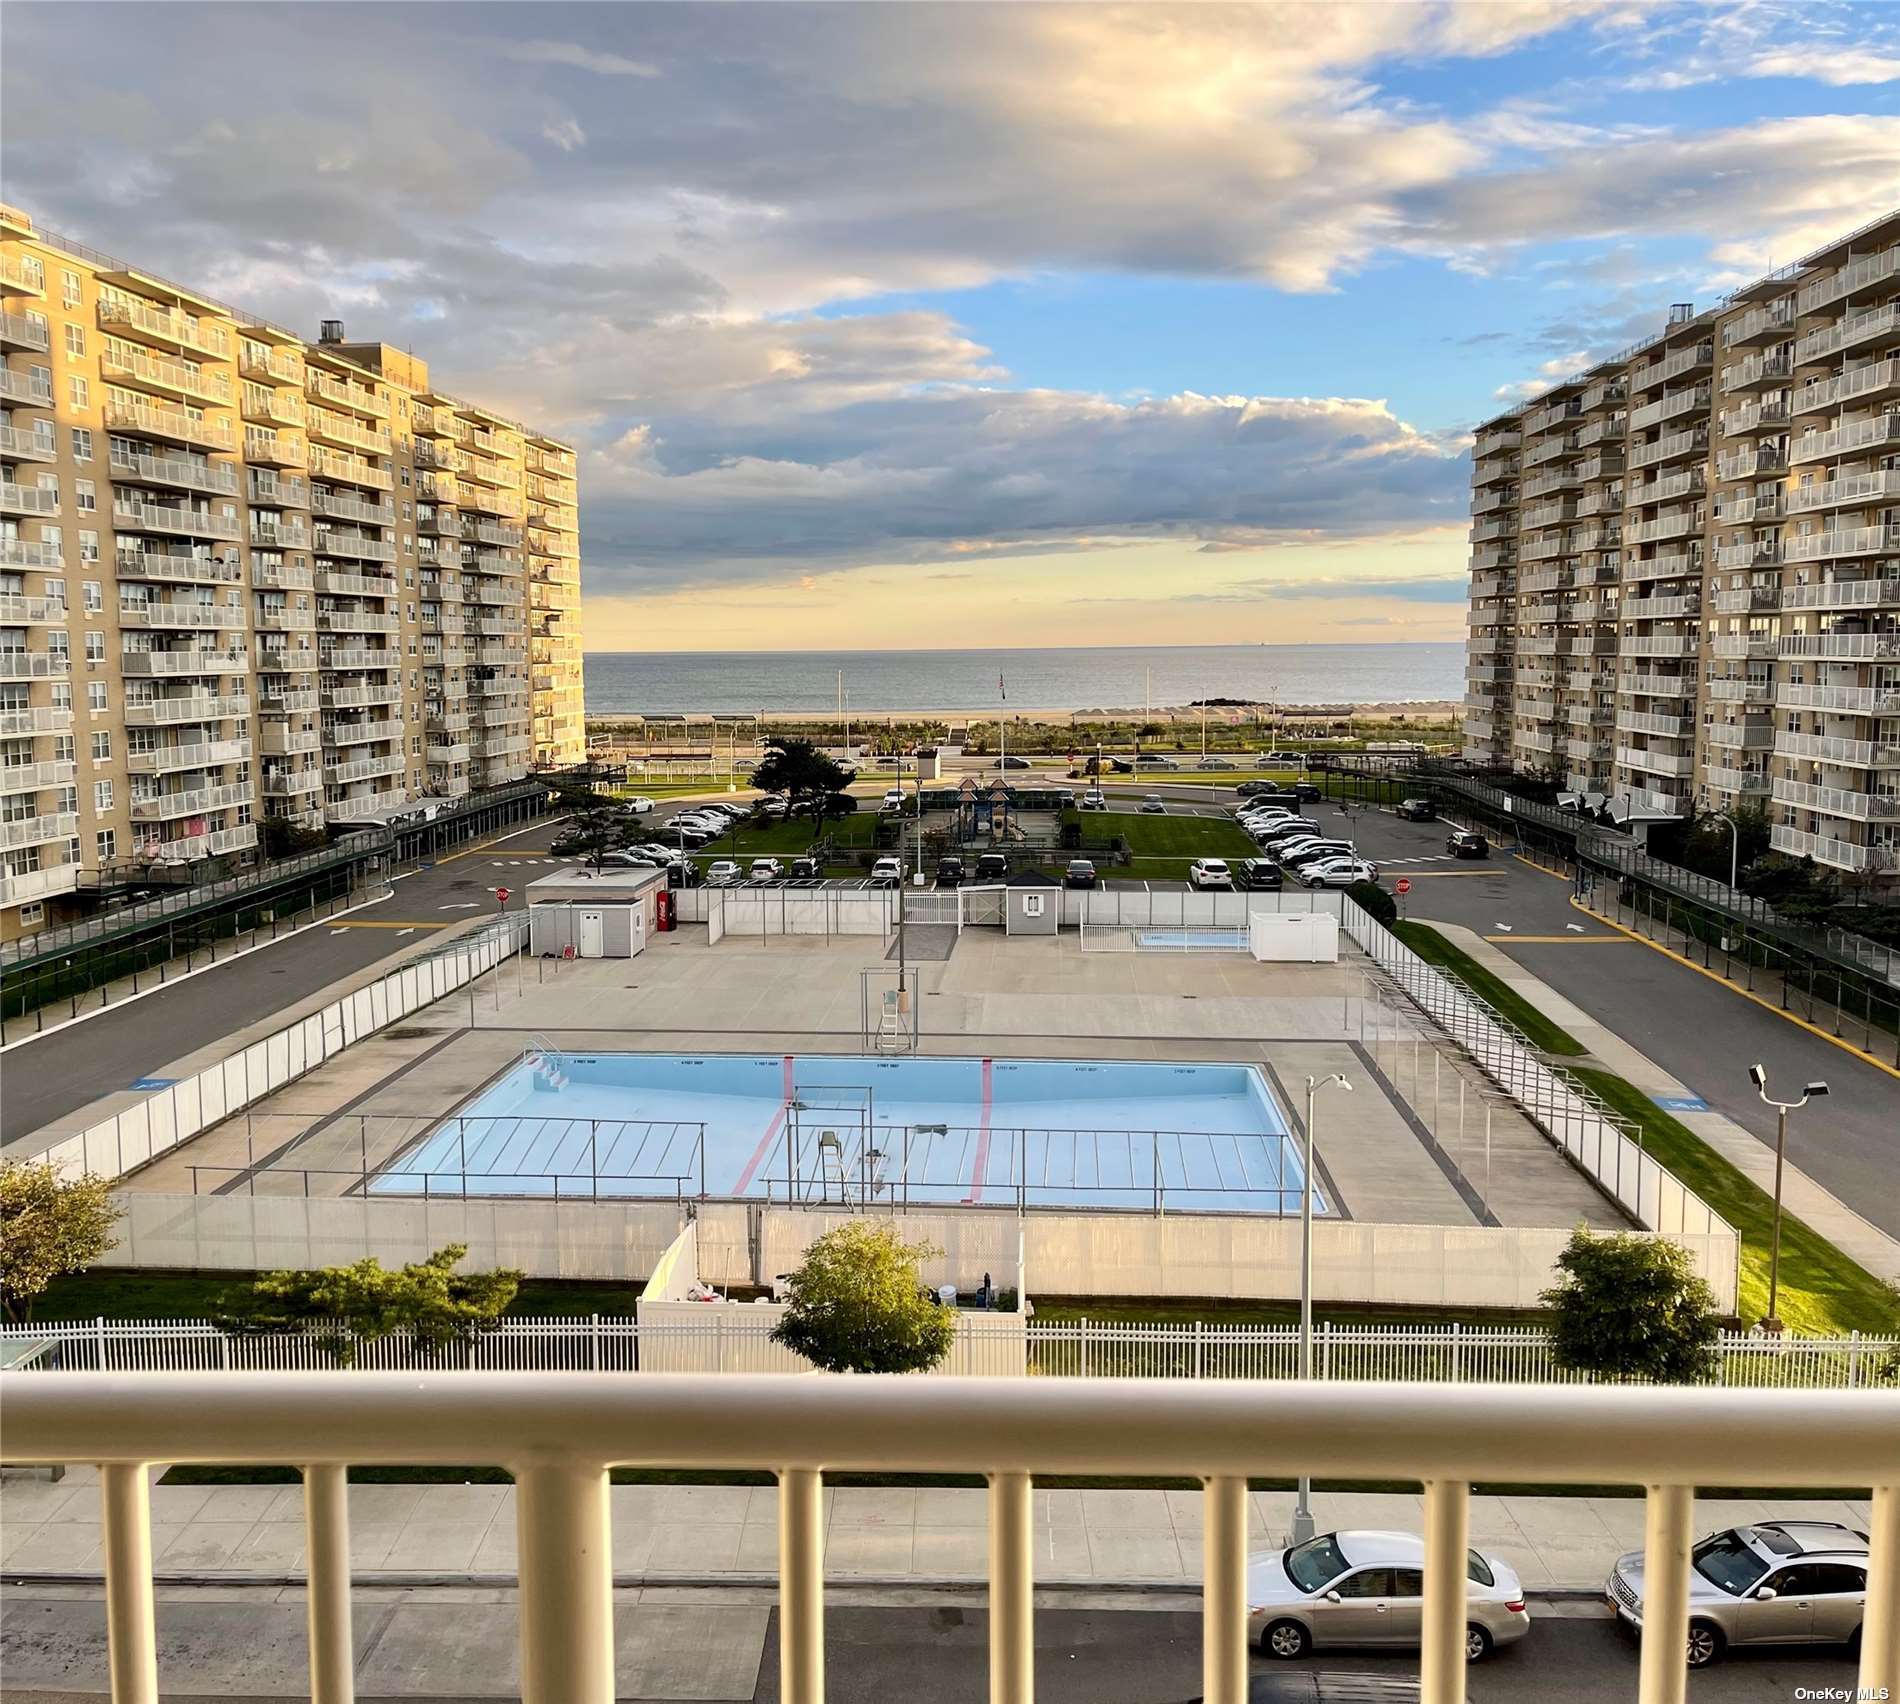 a view of swimming pool with outdoor seating and buildings in the background